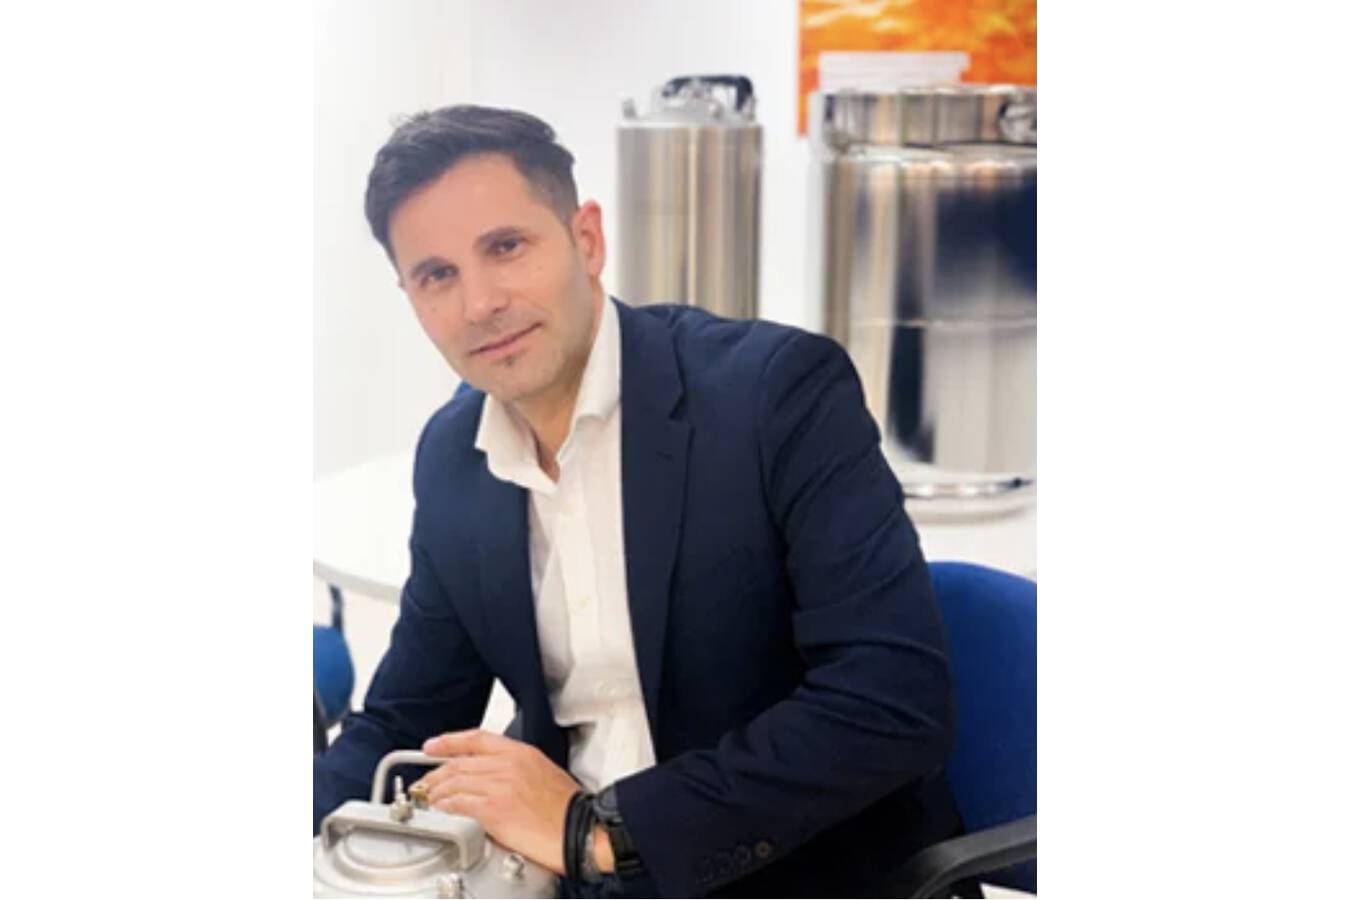 How stainless steel protects people and the planet Interview with Zwoni Denac, Product Manager at Thielmann, manufacturers of high-grade stainless steel container solutions, are committed to making industry more sustainable.